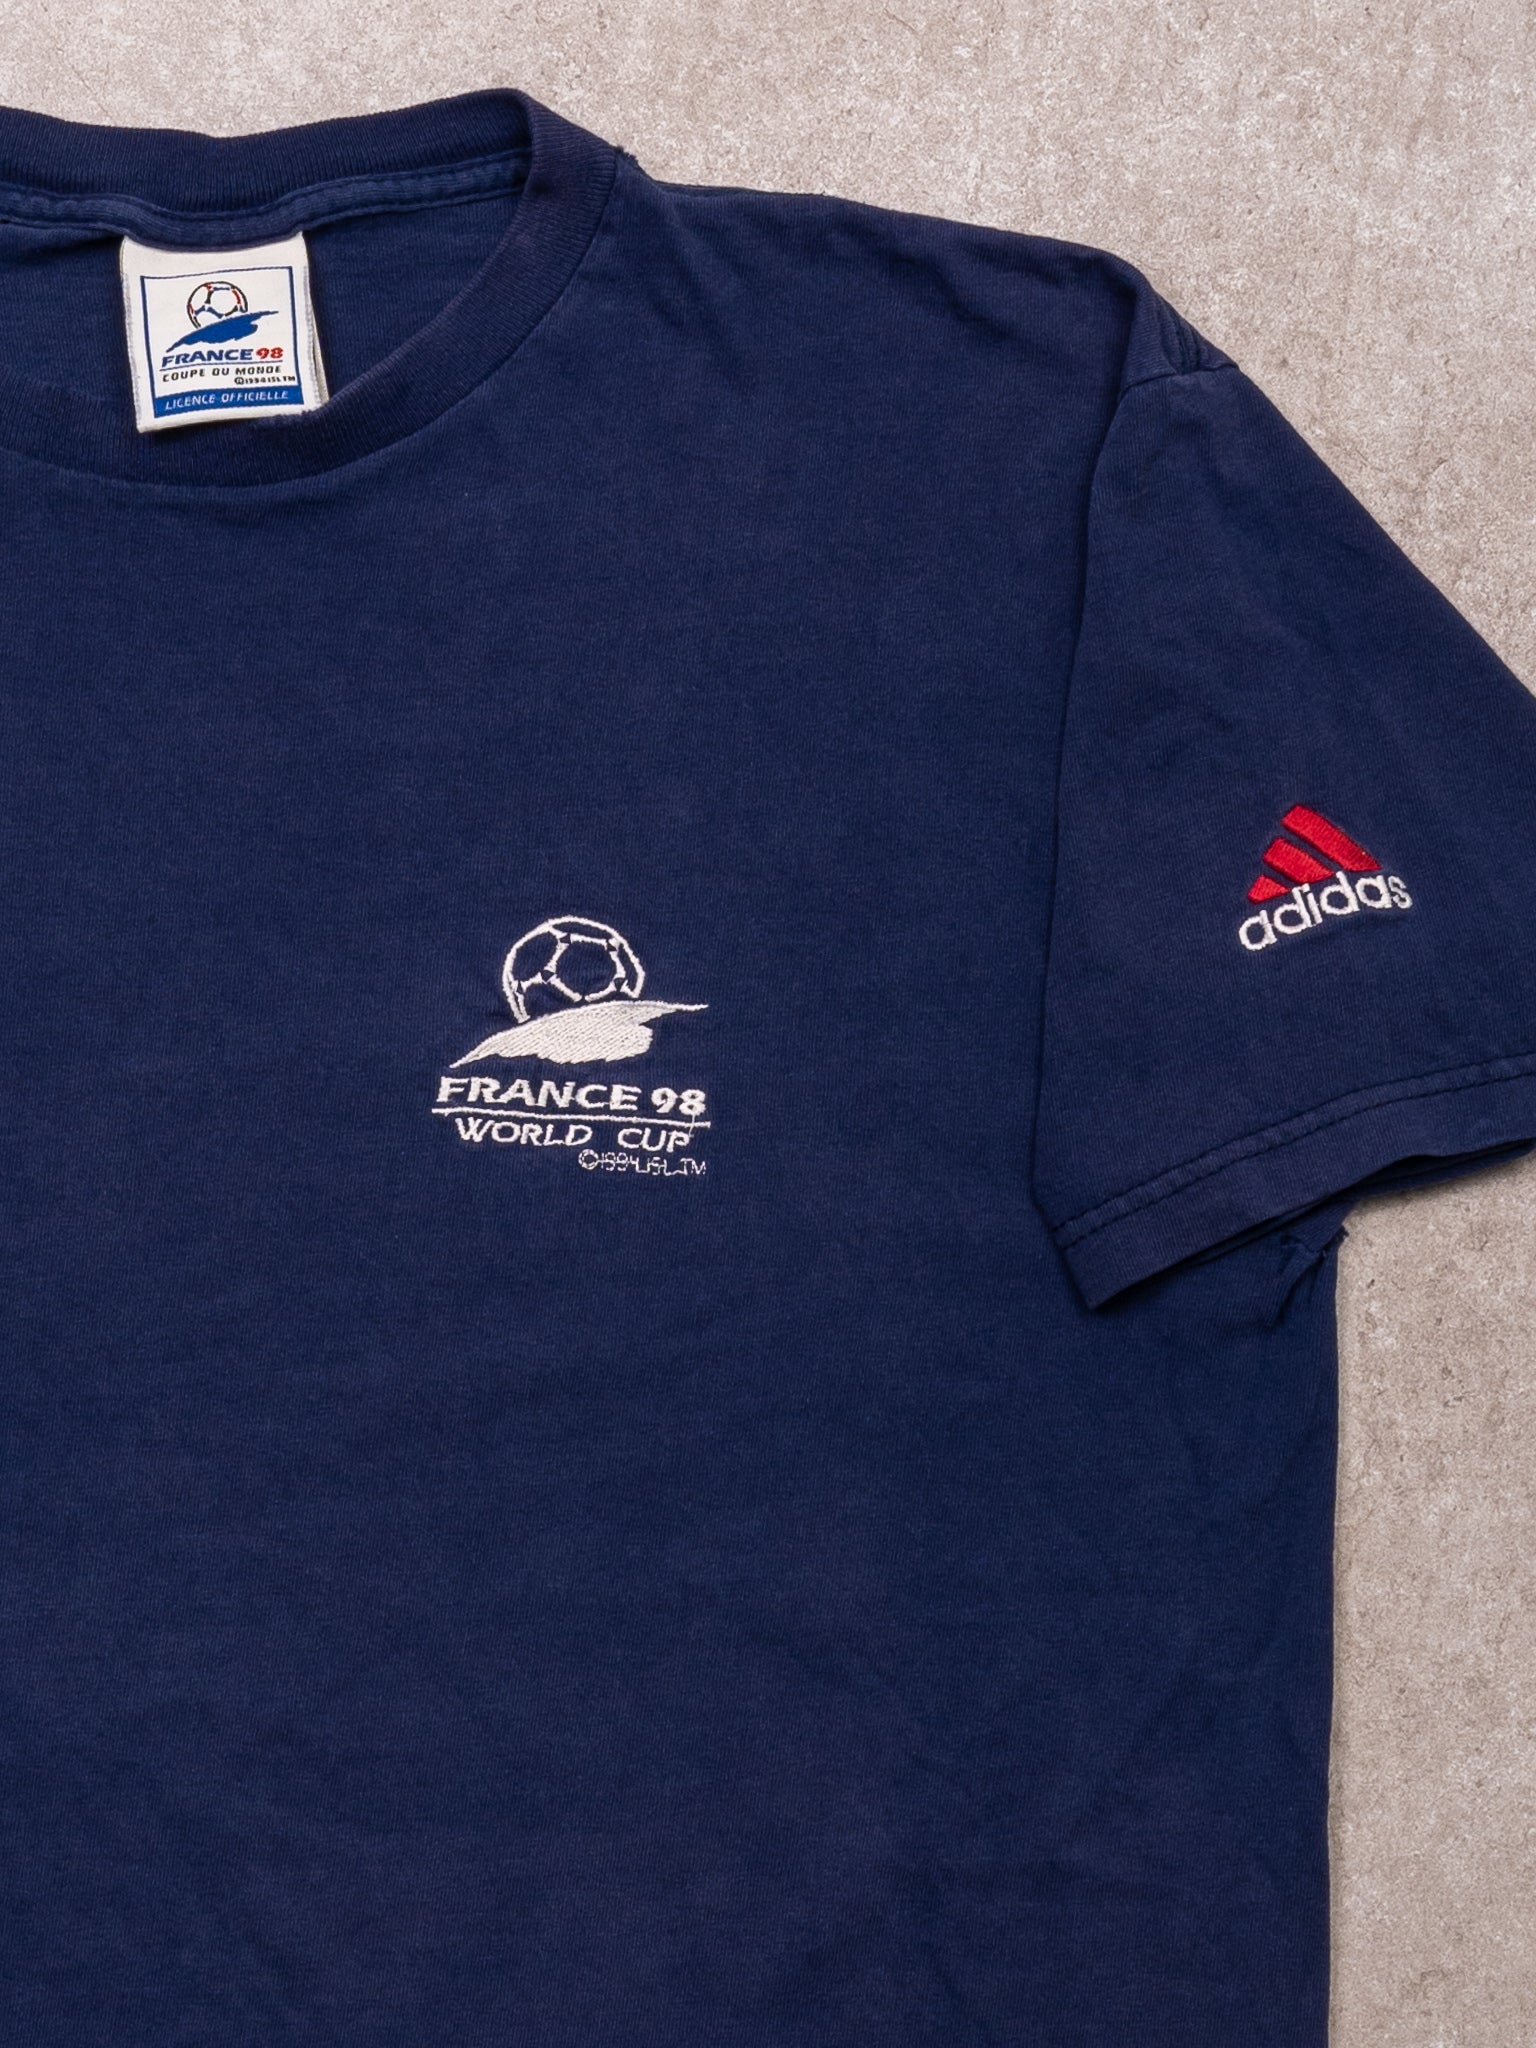 VIntage '98 Adidas x France World Cup Official Tee (M)